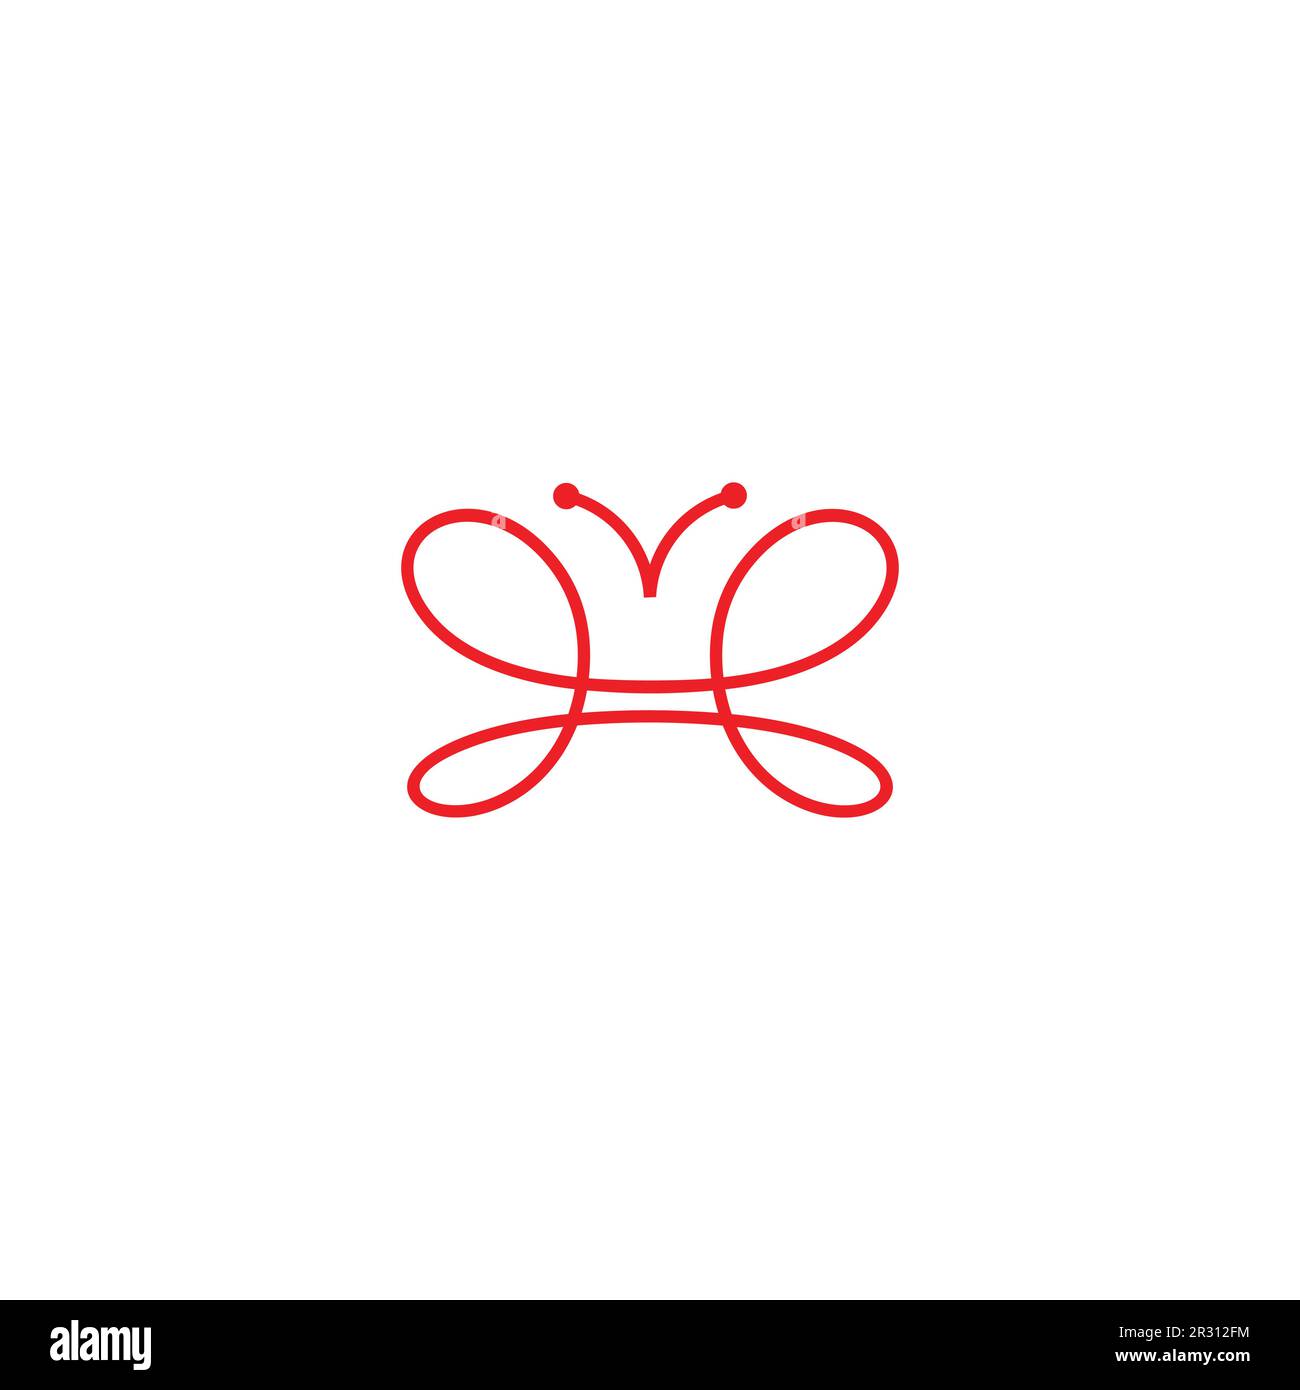 simple thread wire butterfly symbol logo vector Stock Vector